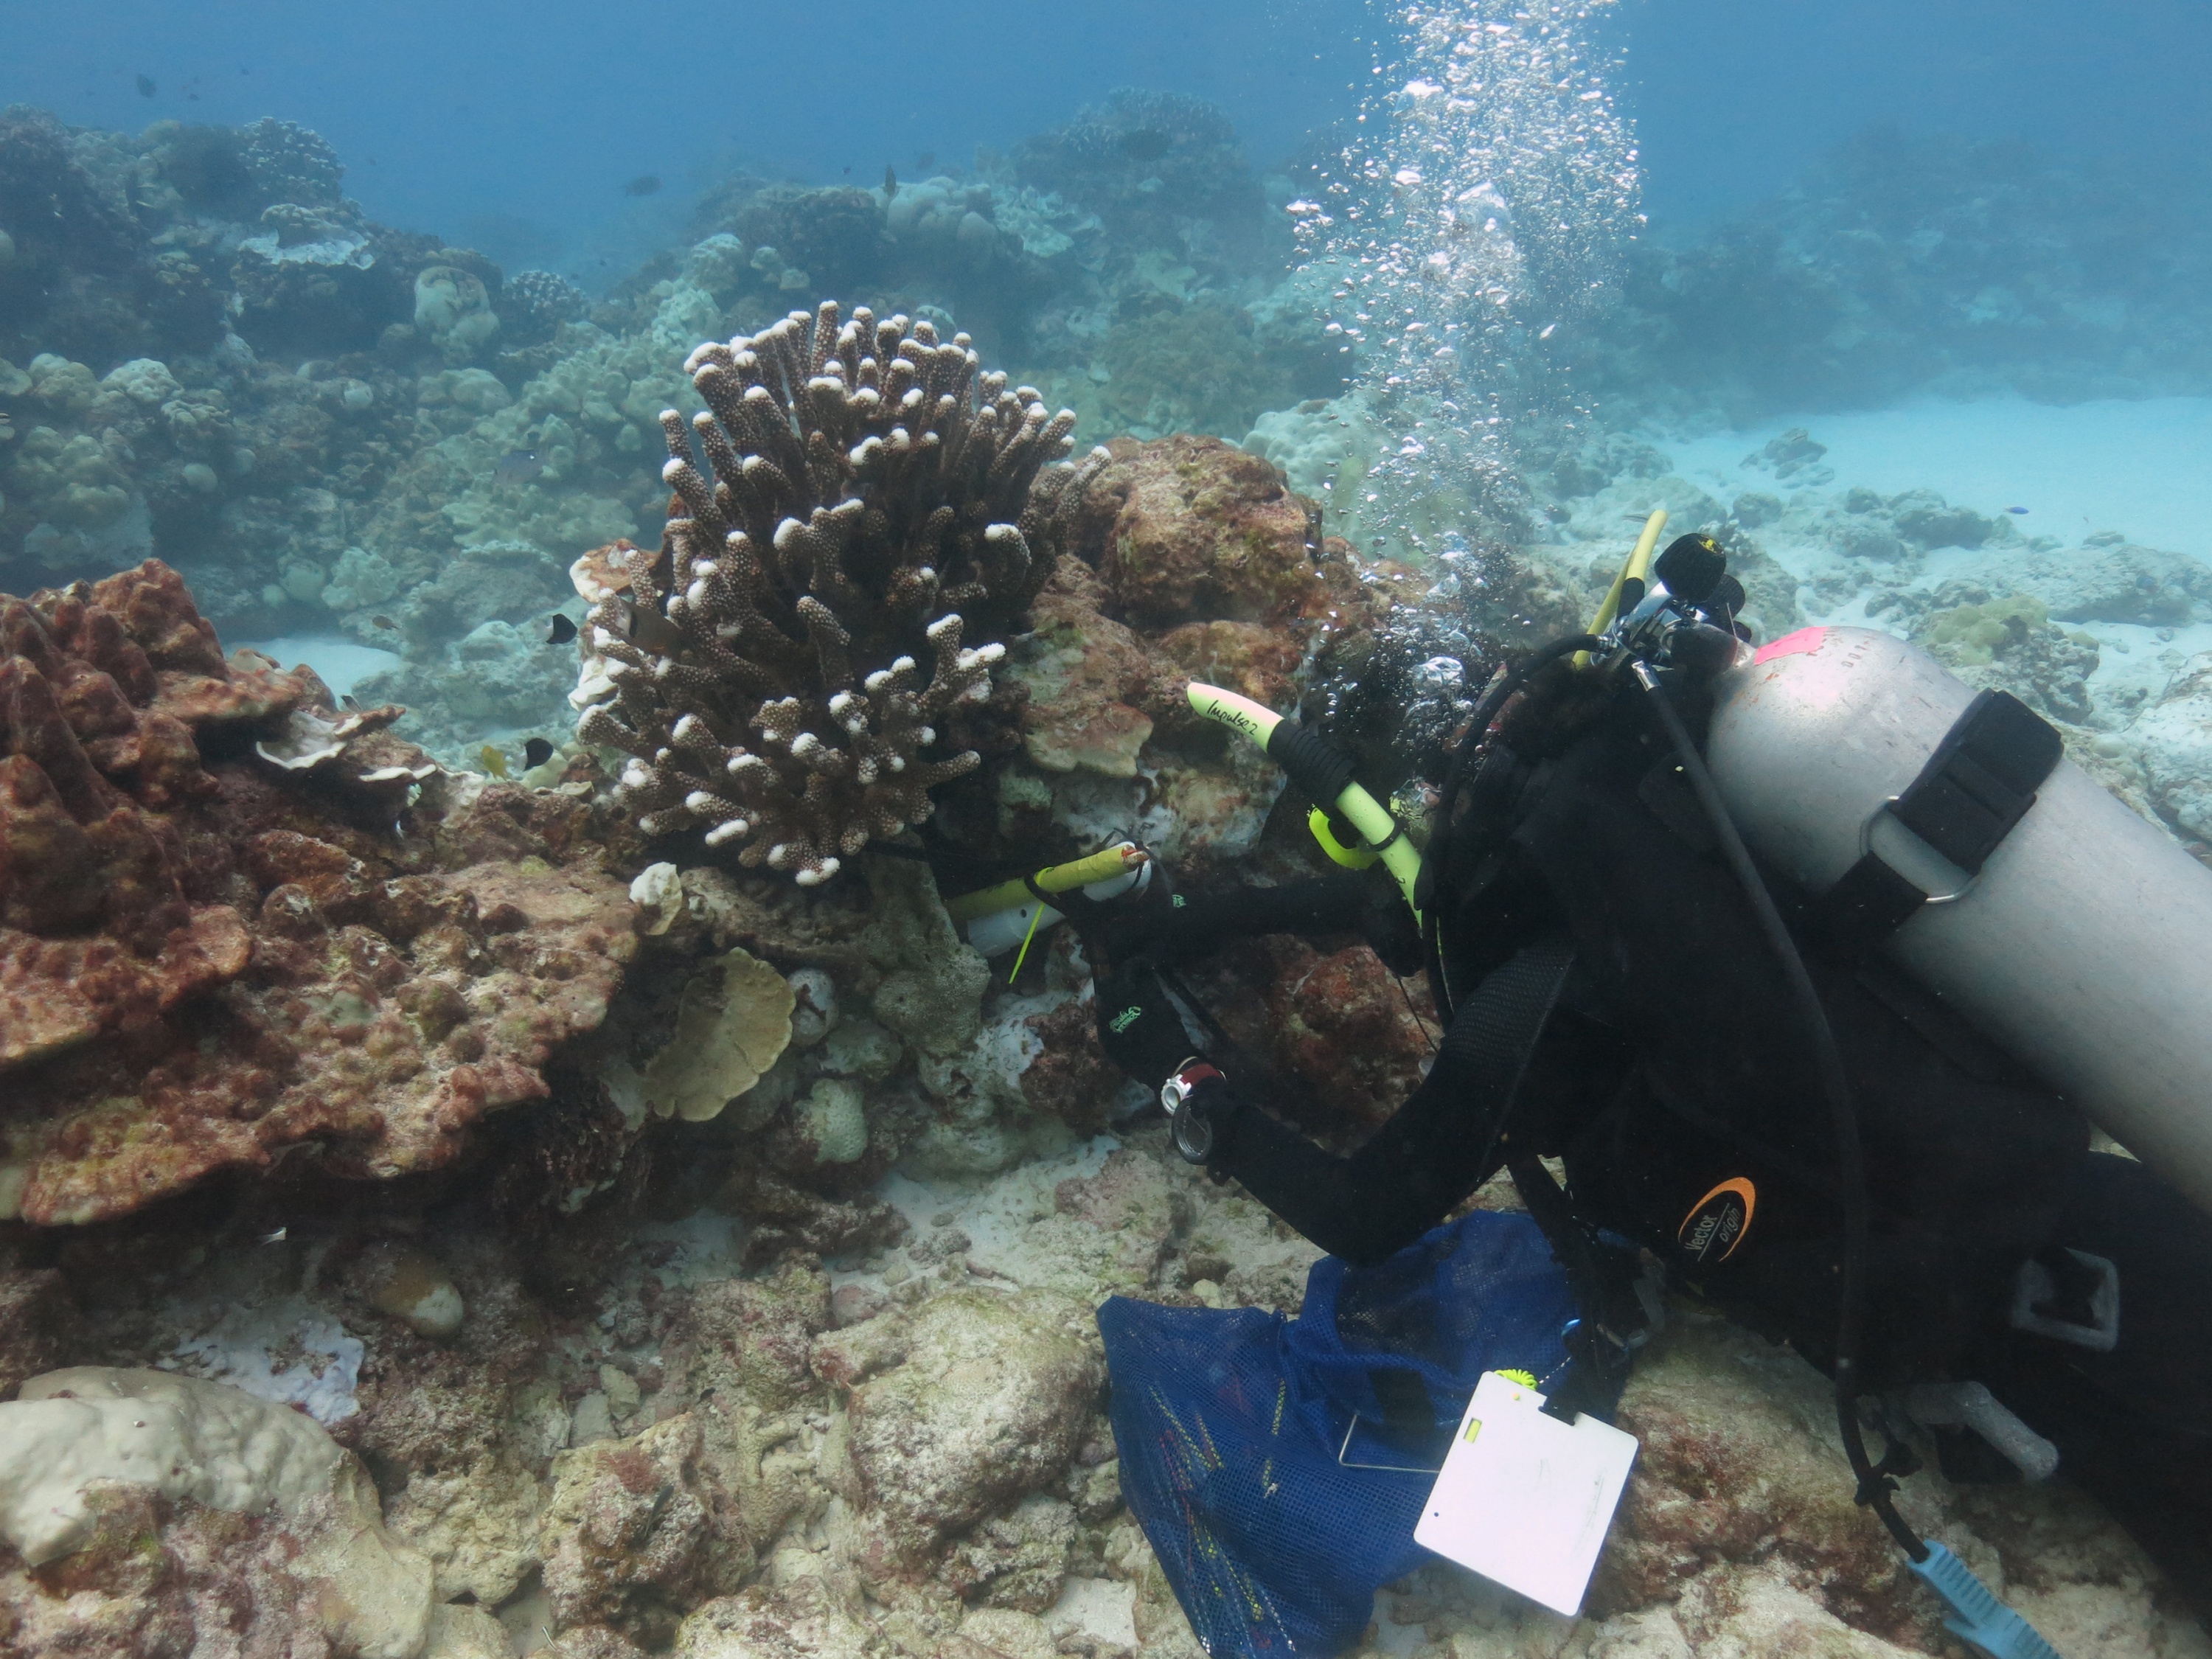 Graduate student Pamela Grothe installs temperature and salinity logging devices on a Christmas Island coral reef to monitor conditions through the current El Niño event. (Credit: Alyssa Atwood, Georgia Tech)